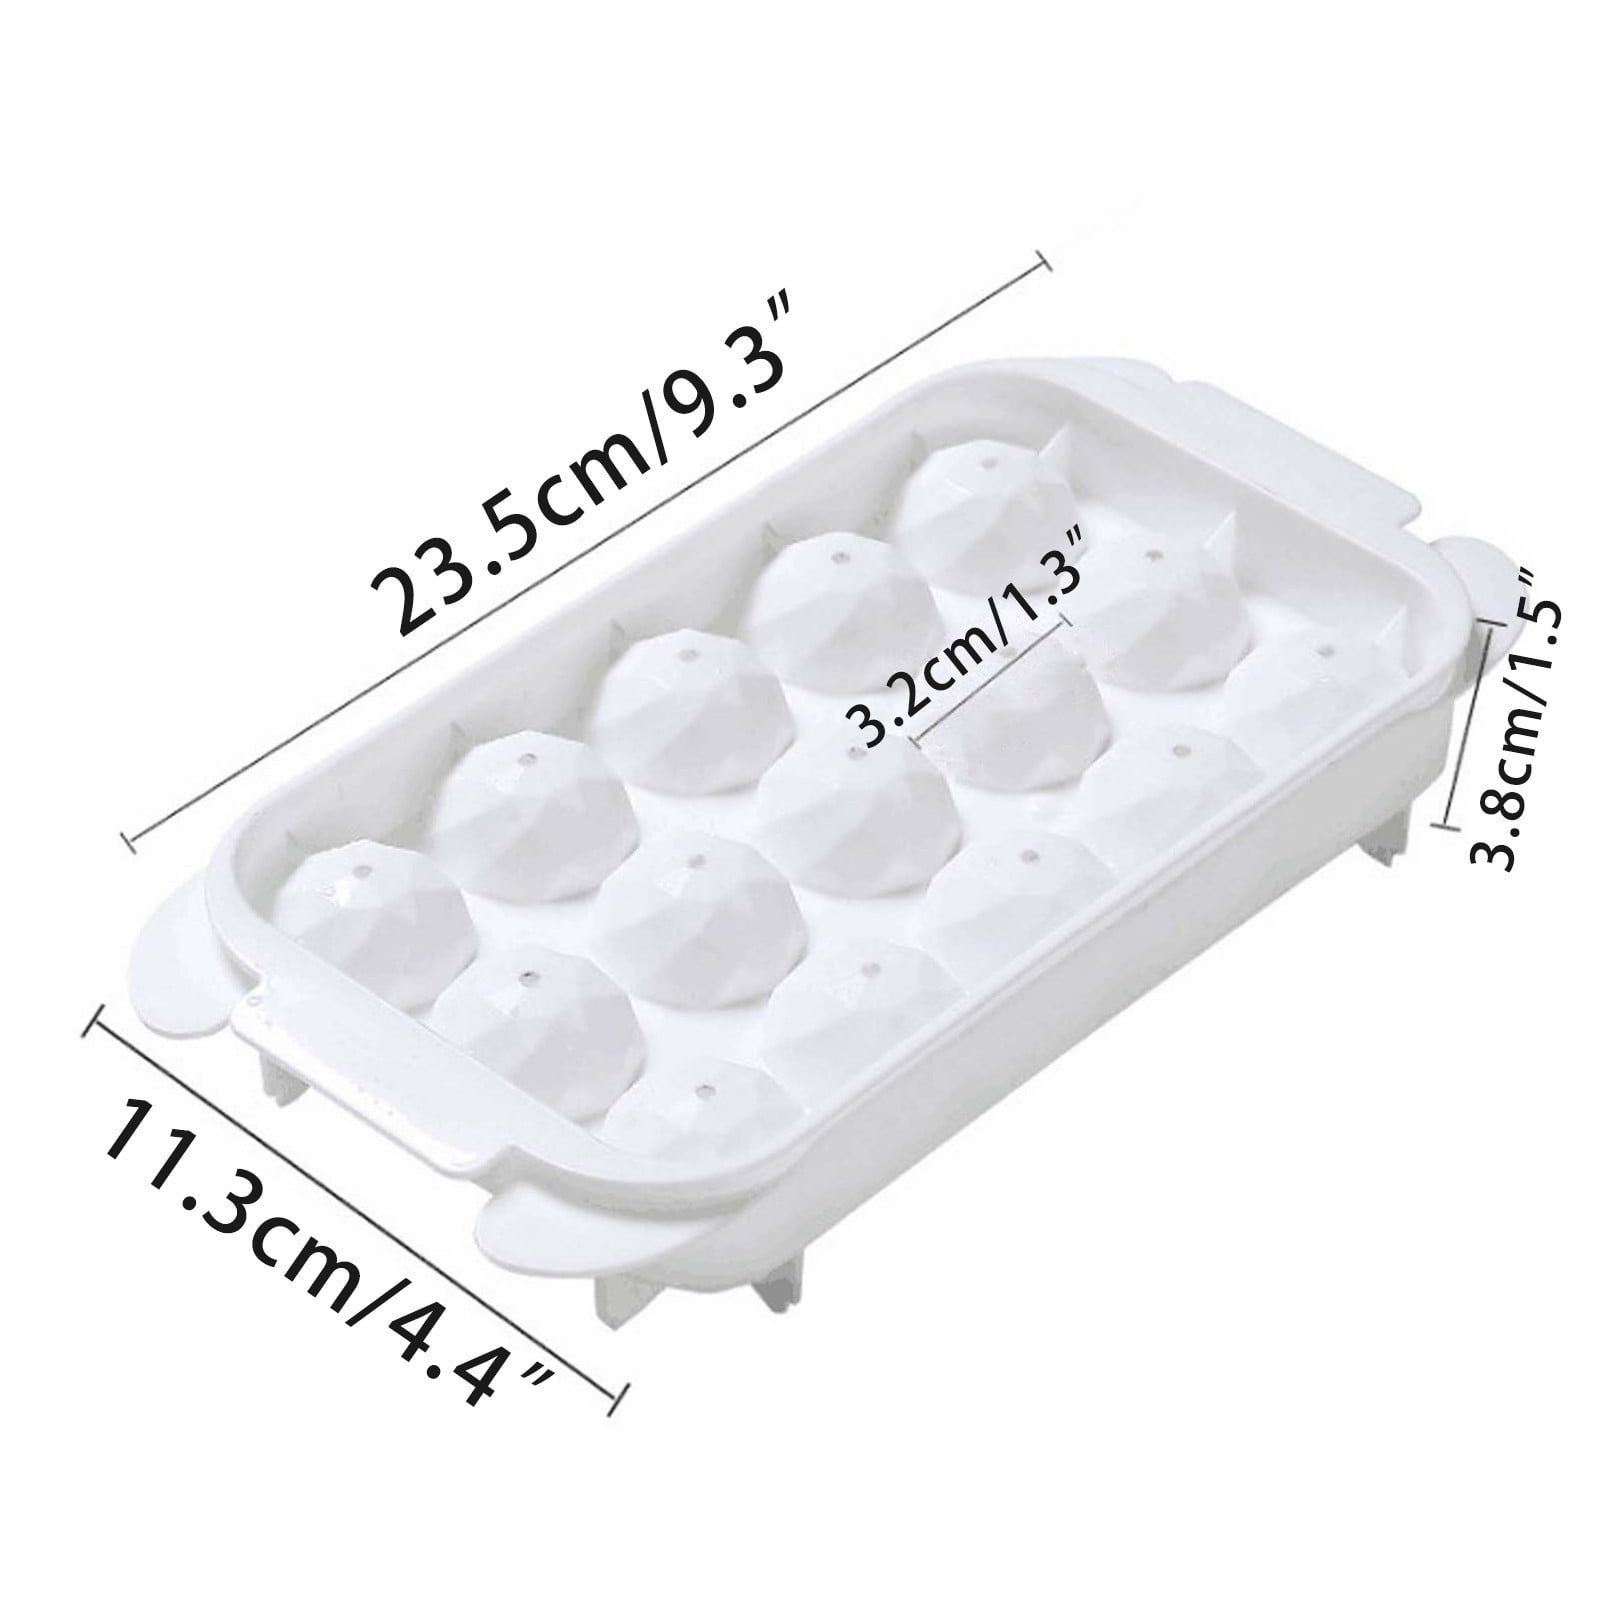 FAHXNVB Small Round Ice Cube Trays for Freezer Ice Ball Maker Mold with Lid Circle Ice Tray Reusable Sphere Ice Cube Mold for Whisky, Cocktail, Coffee